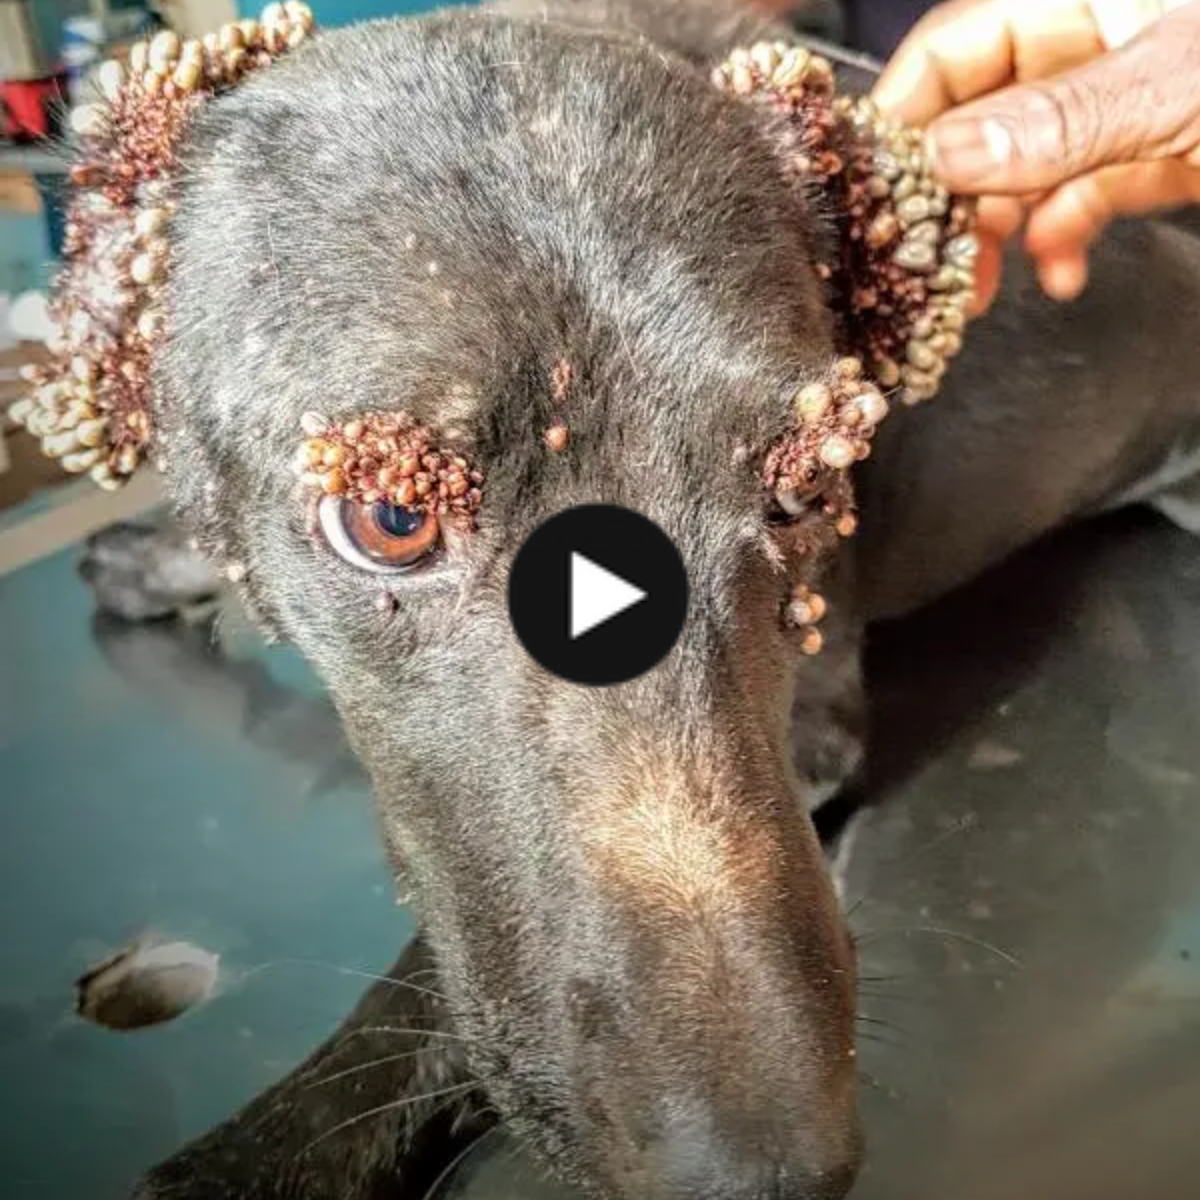 Starting from the depths of despair: thousands of ticks clinging to the poor dog’s ears, he hoped someone would help him remove the species from his painful body.